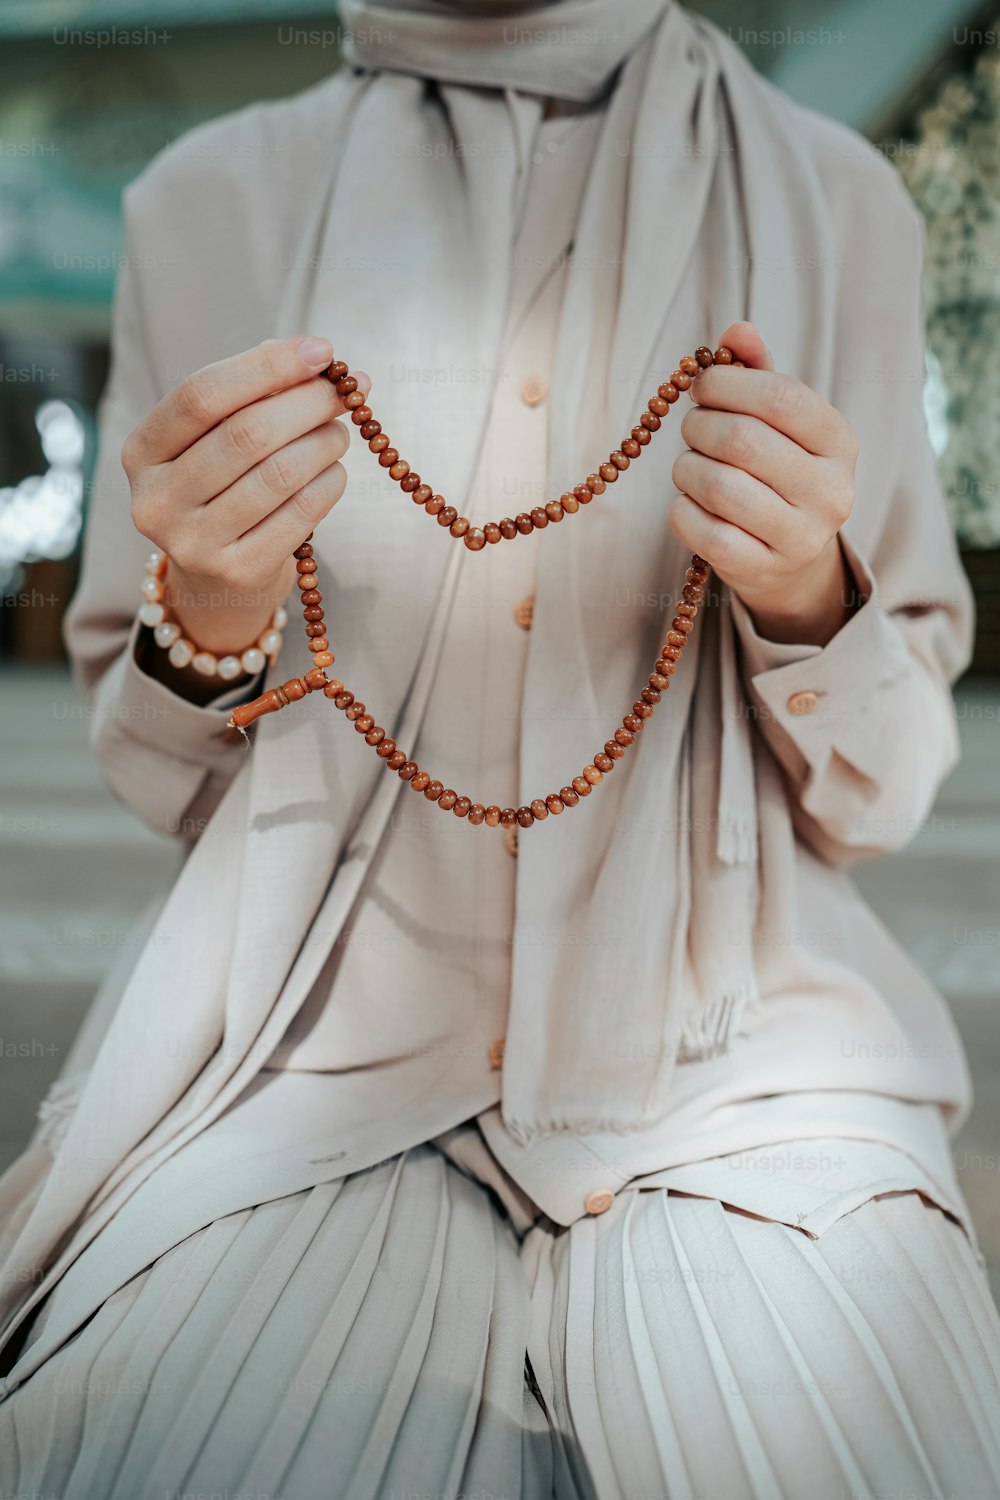 a woman in a white outfit holding a rosary